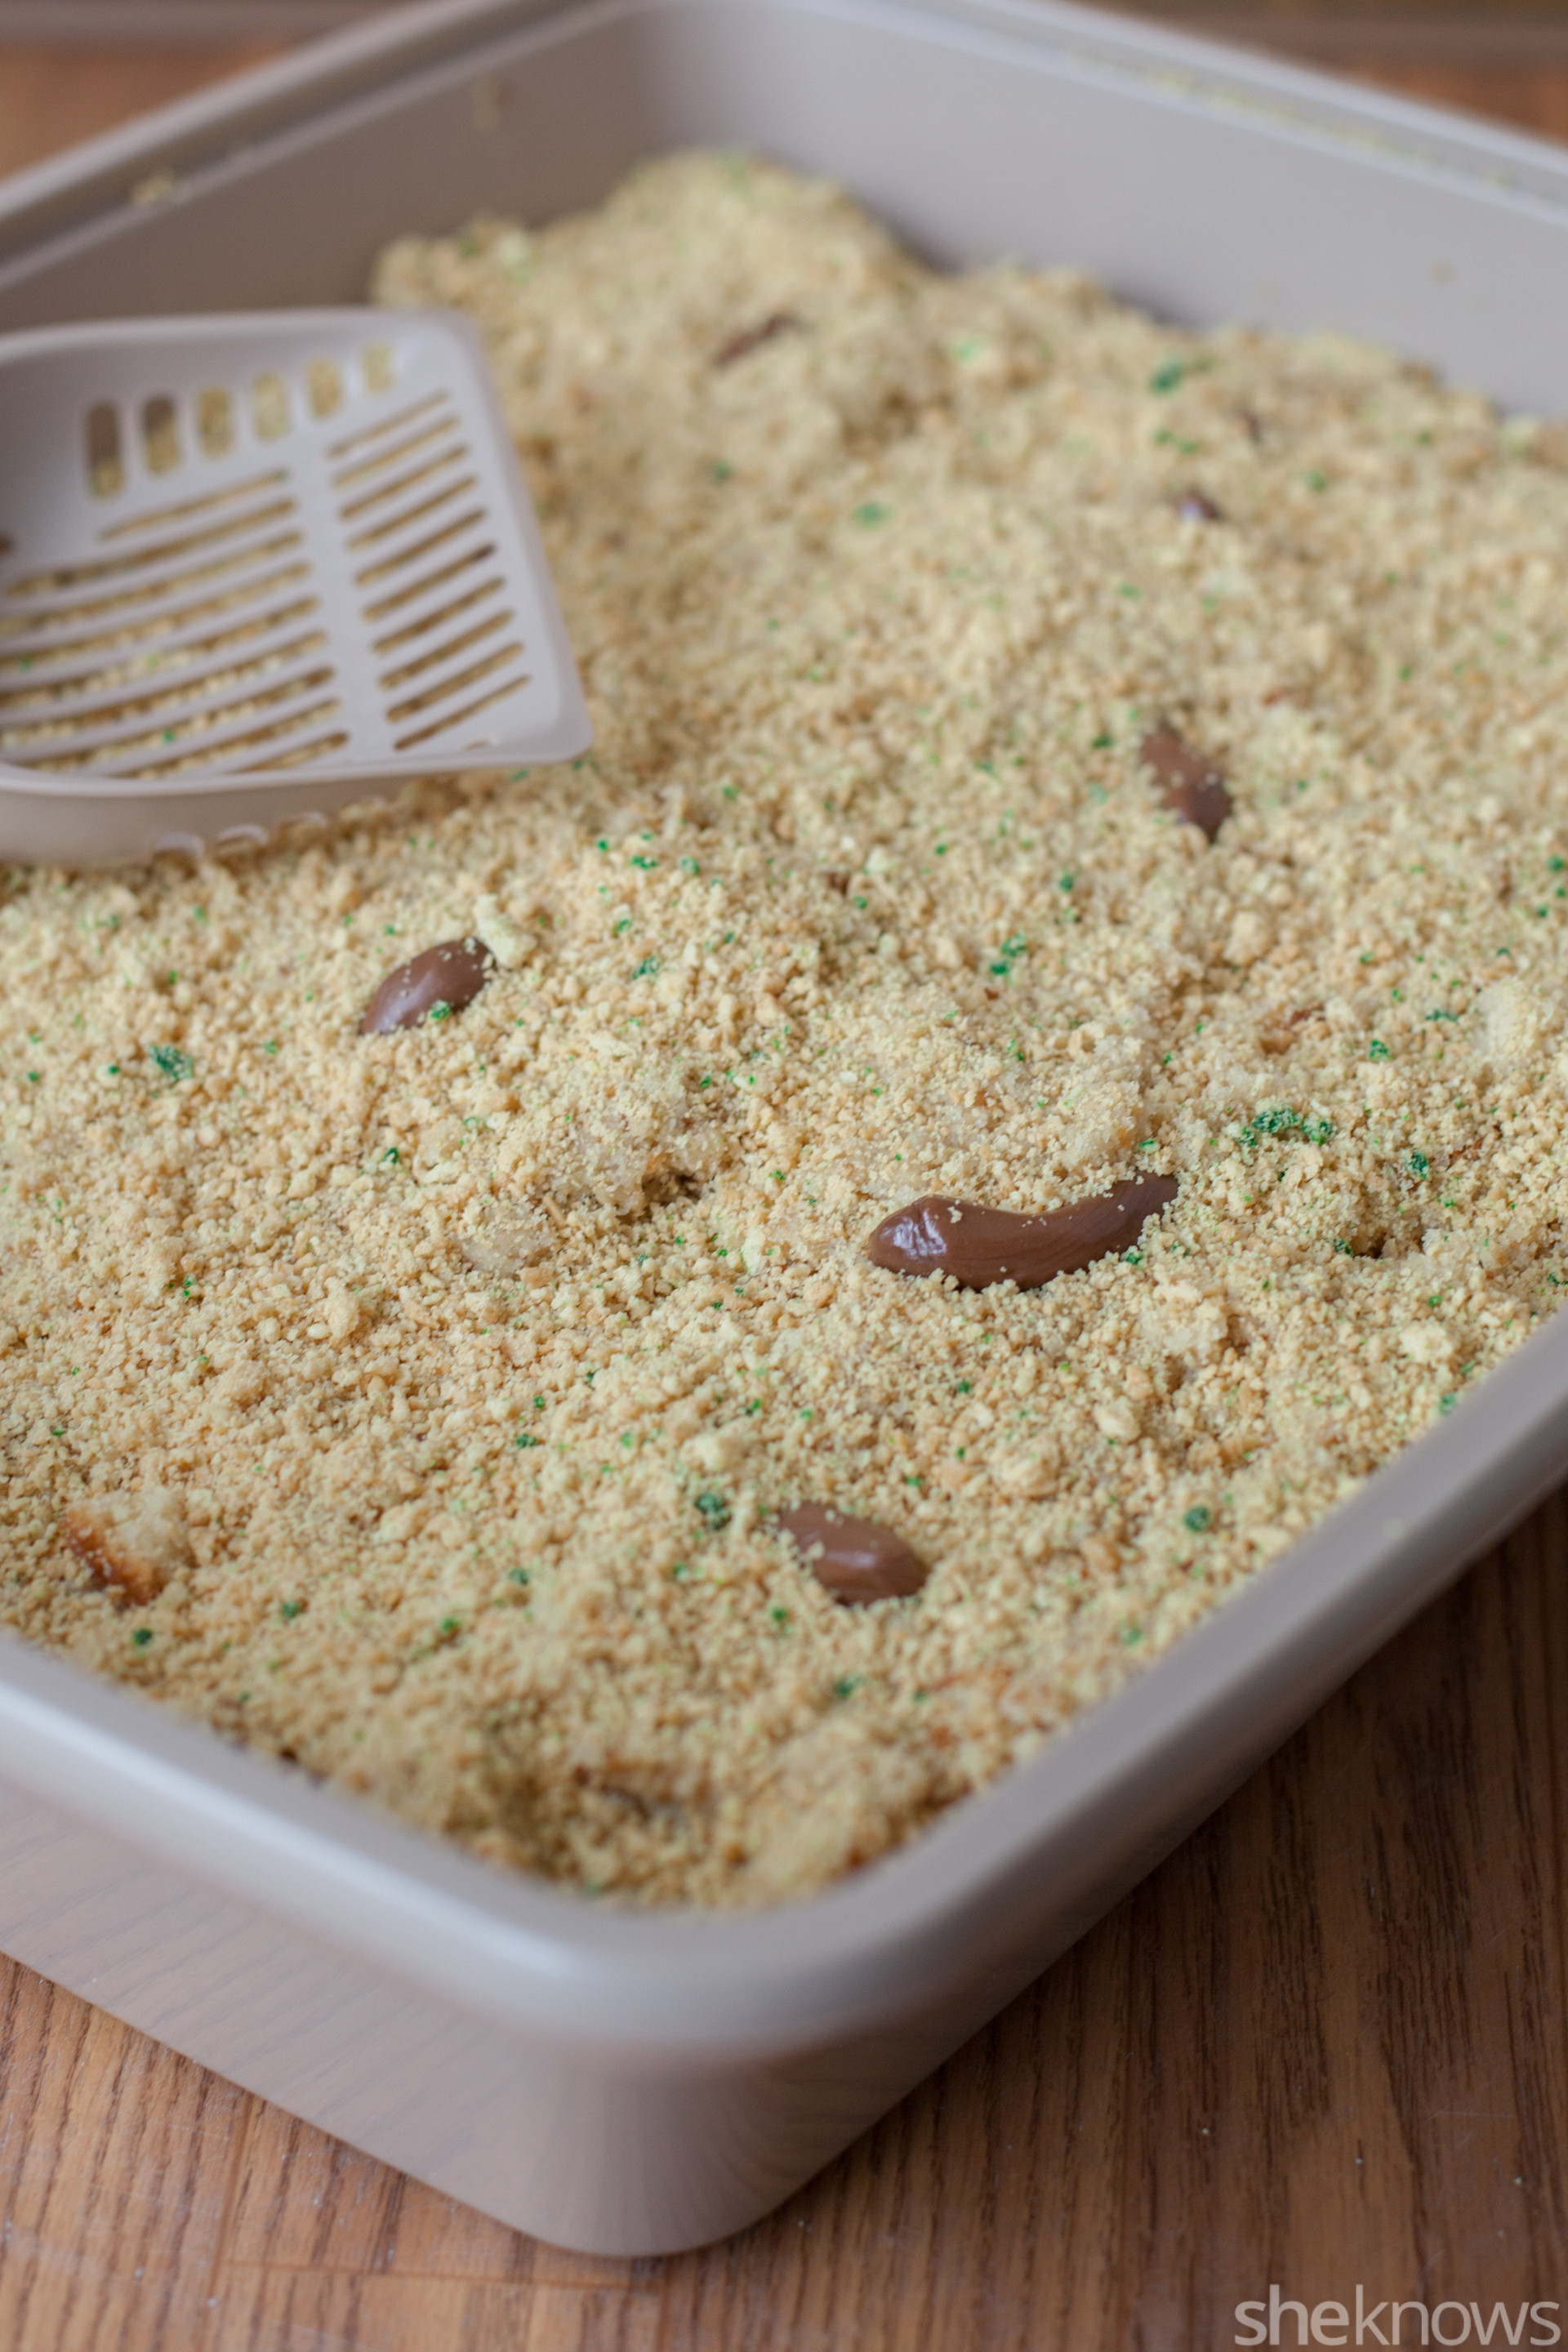 Kitty Liter Cake Recipe
 Kitty litter cake is the April Fools’ Day prank your kids